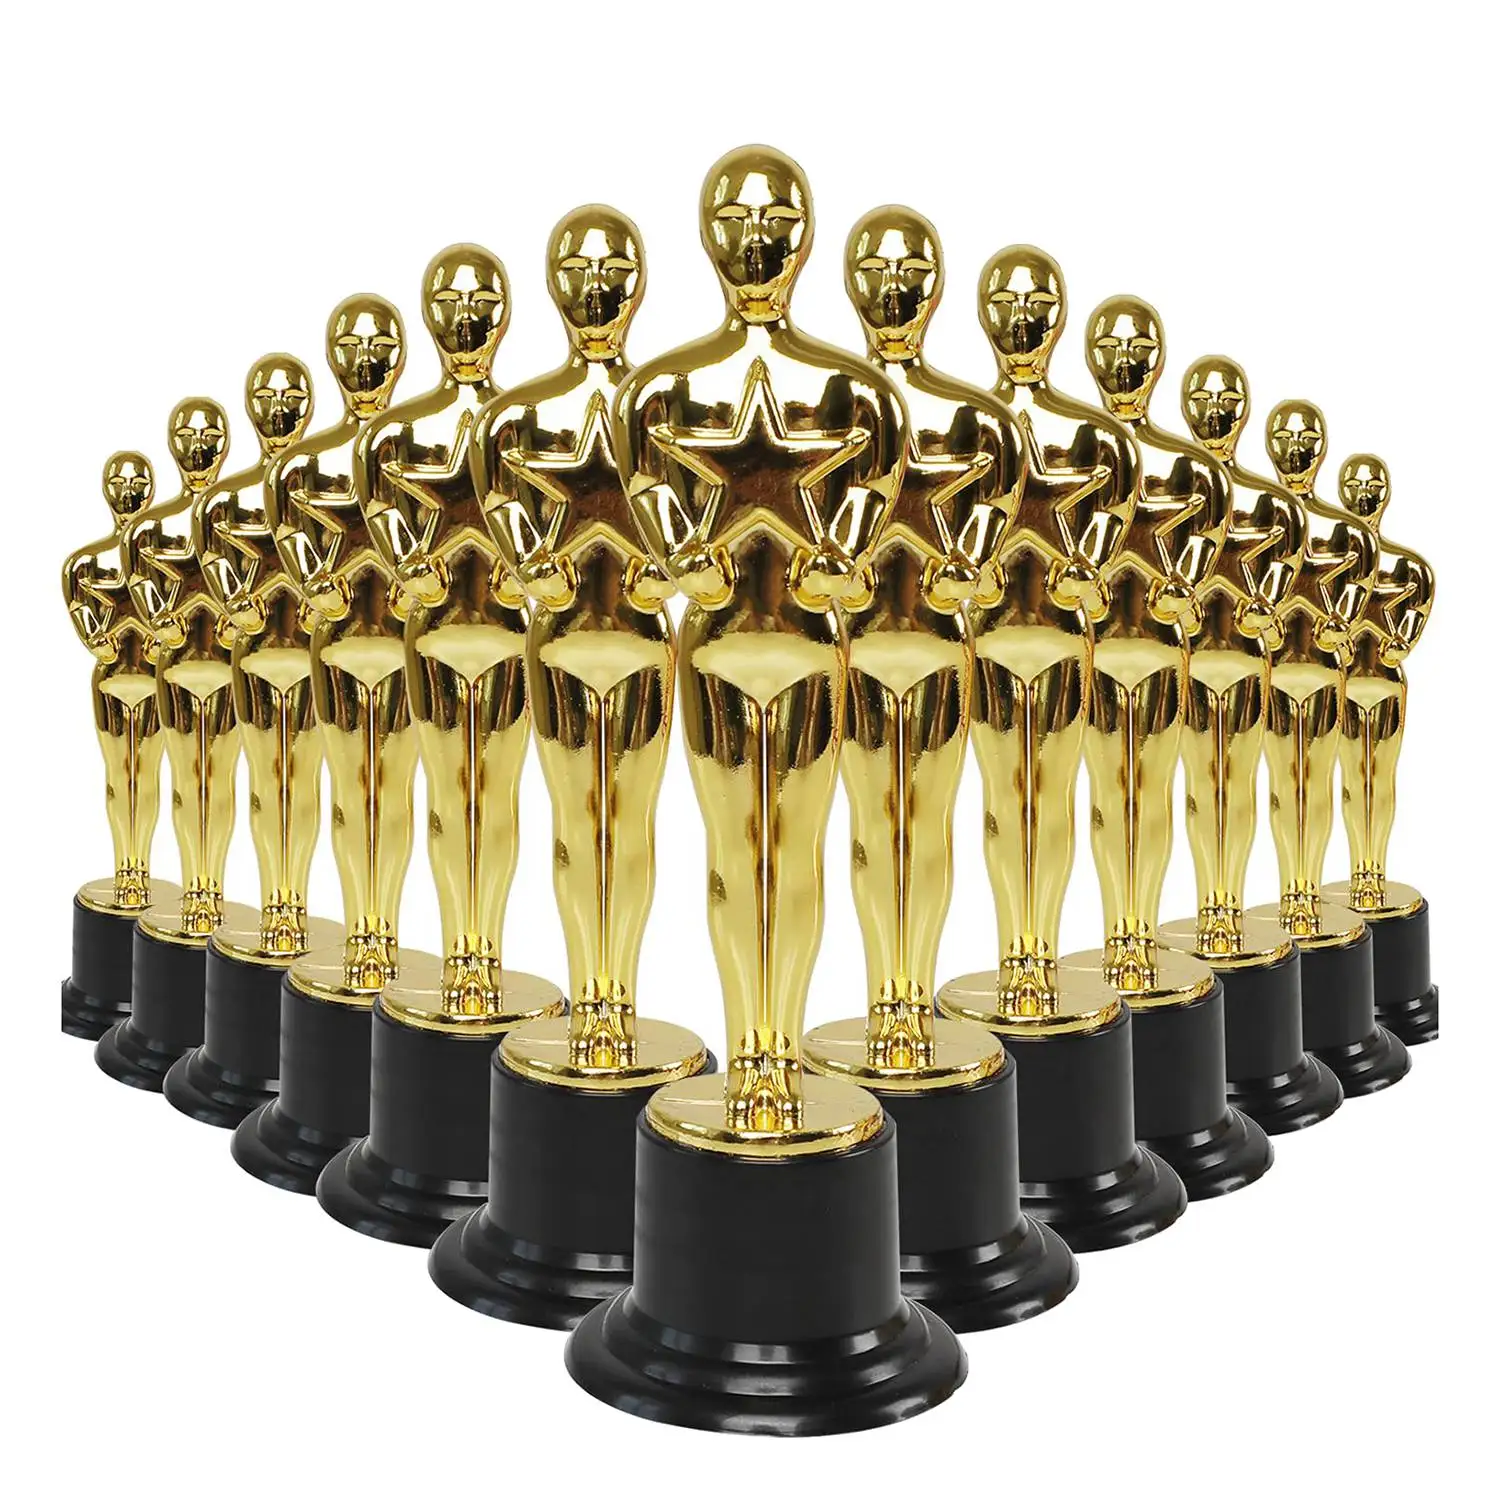 

24 Pack Plastic Gold Star Award Trophies Statuette for Party Favors,School Award,Game Prize,Party Prize